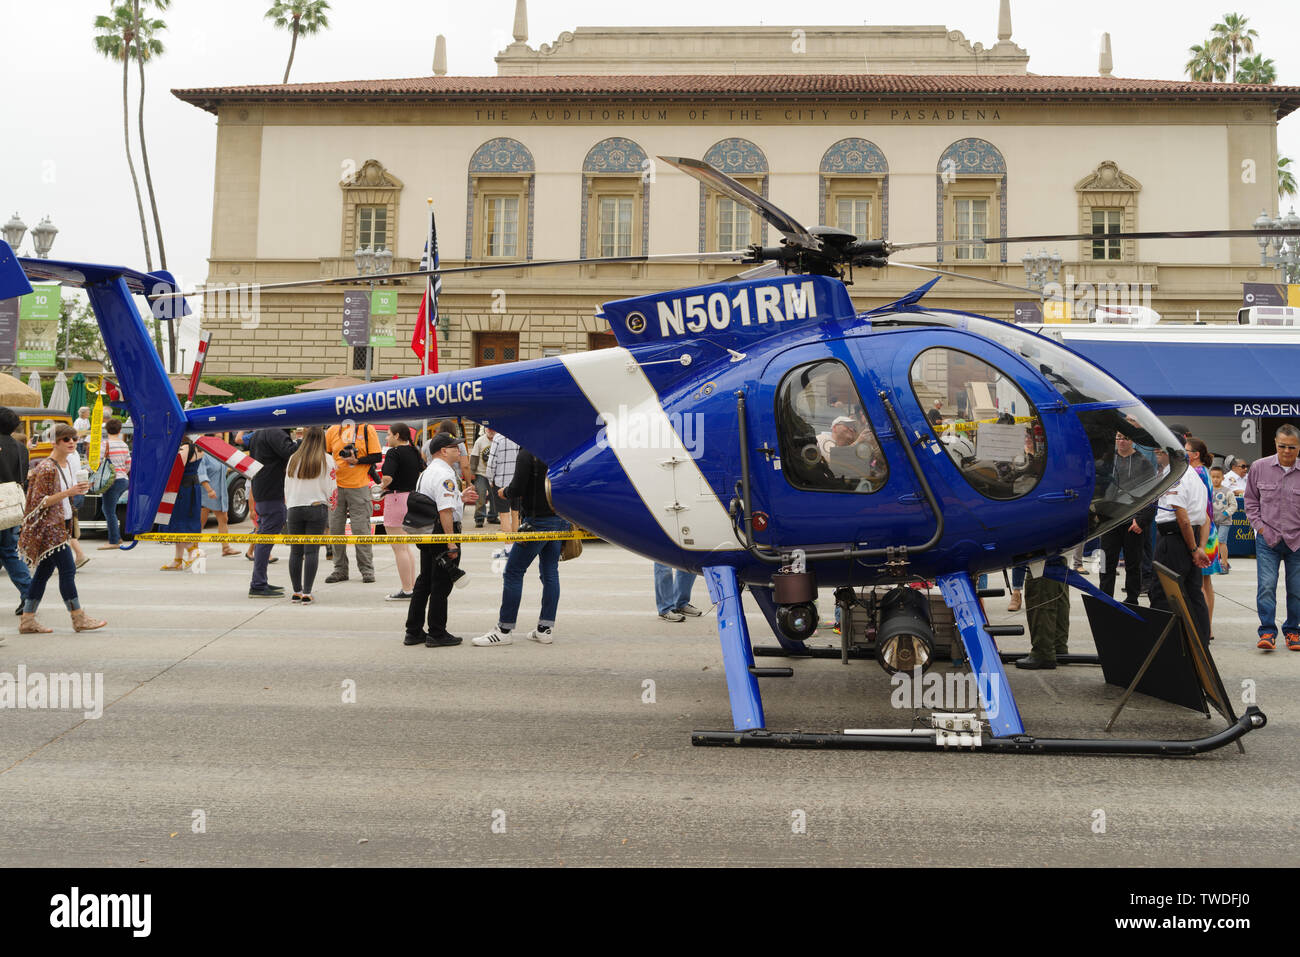 Image showing a Pasadena Police Department helicopter at the Pasadena Chalk Festival car show. Stock Photo